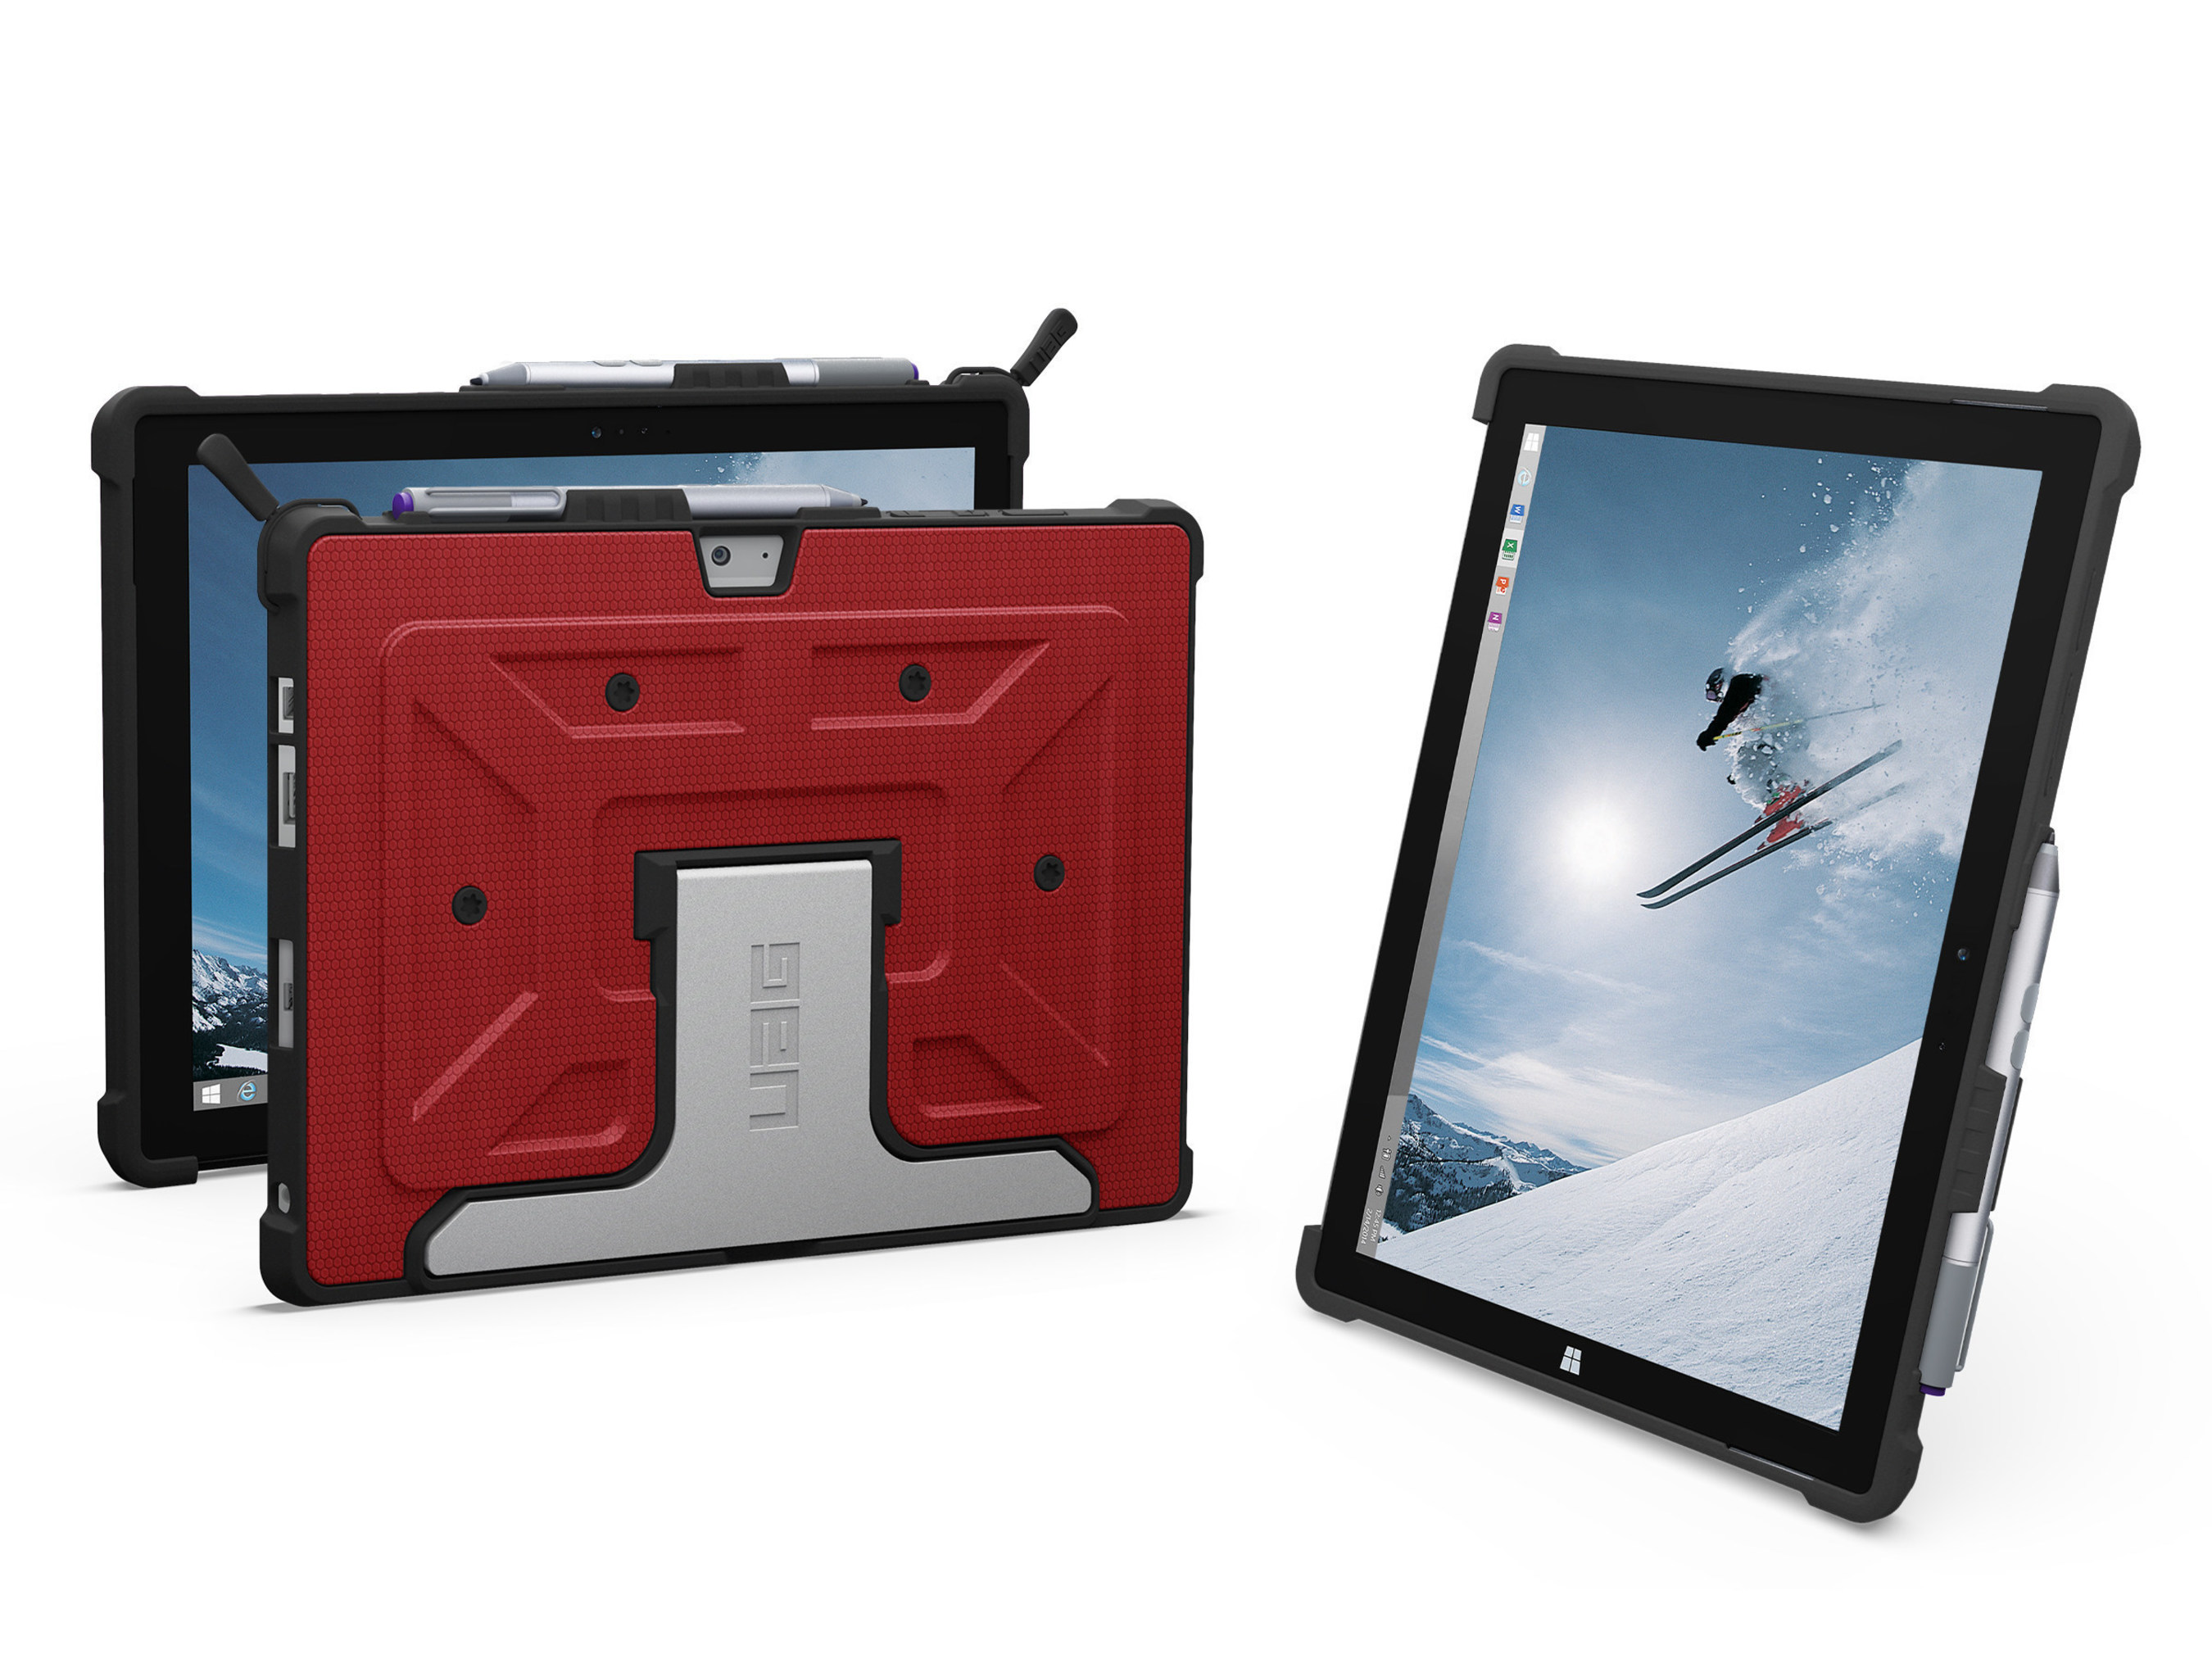 URBAN ARMOR GEAR DEBUTS RUGGED DESIGN TO ENSURE YOUR 'SURFACE' IS COVEREDUAG Ensures Robust Protection with its Military-Tough Cases for the NEW Microsoft Surface 3 Tablet